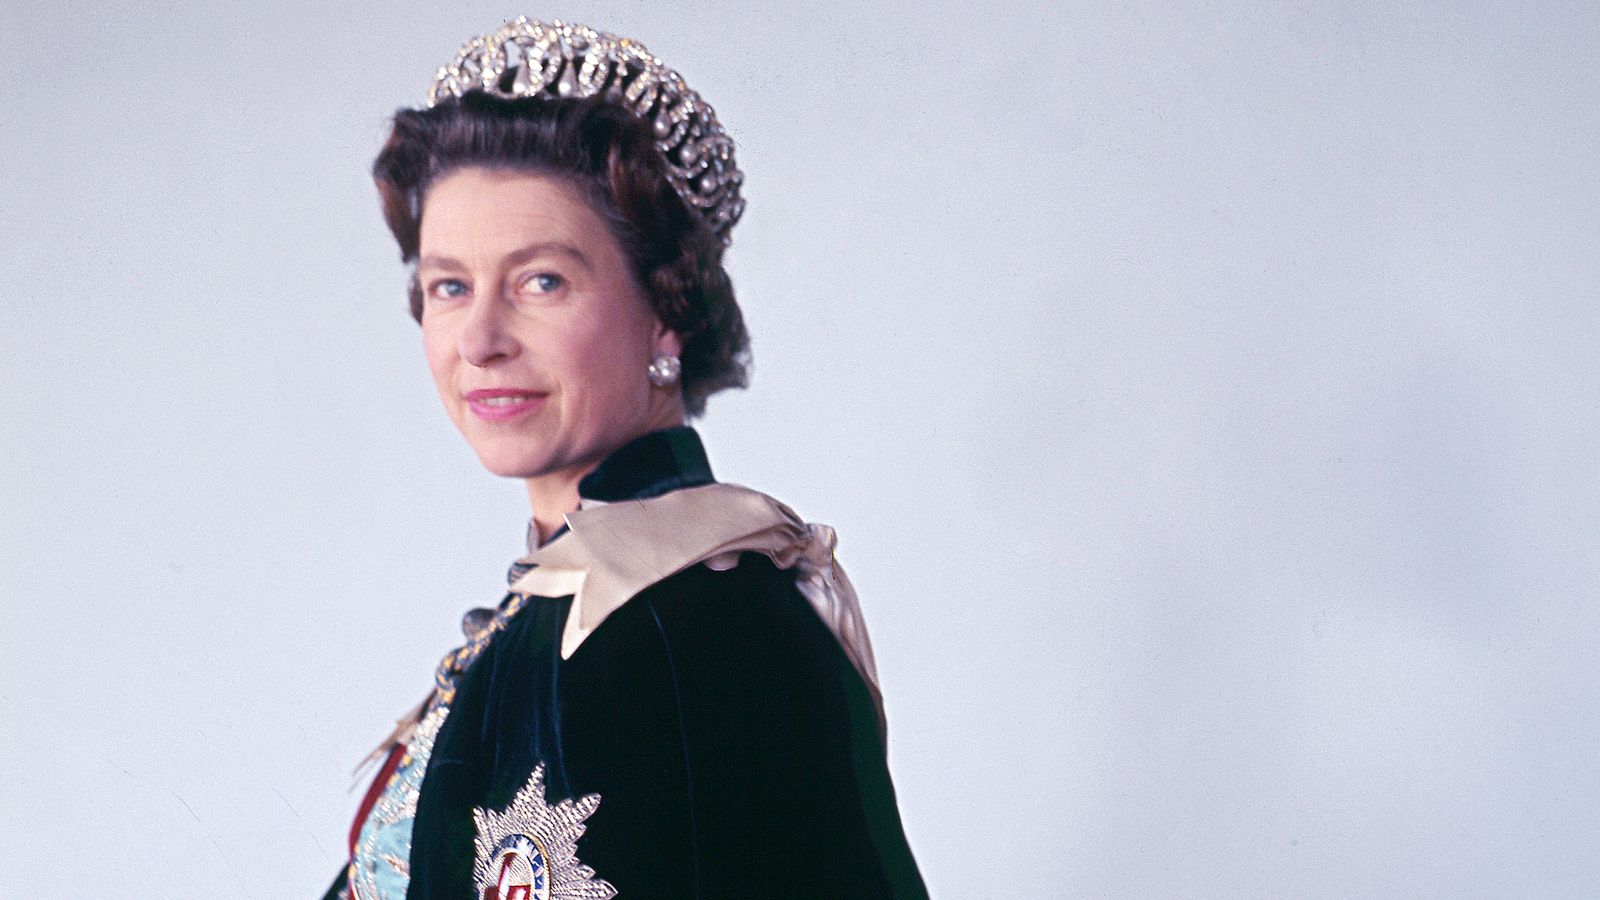 King Charles pays tribute to Queen Elizabeth II on the first anniversary of her death